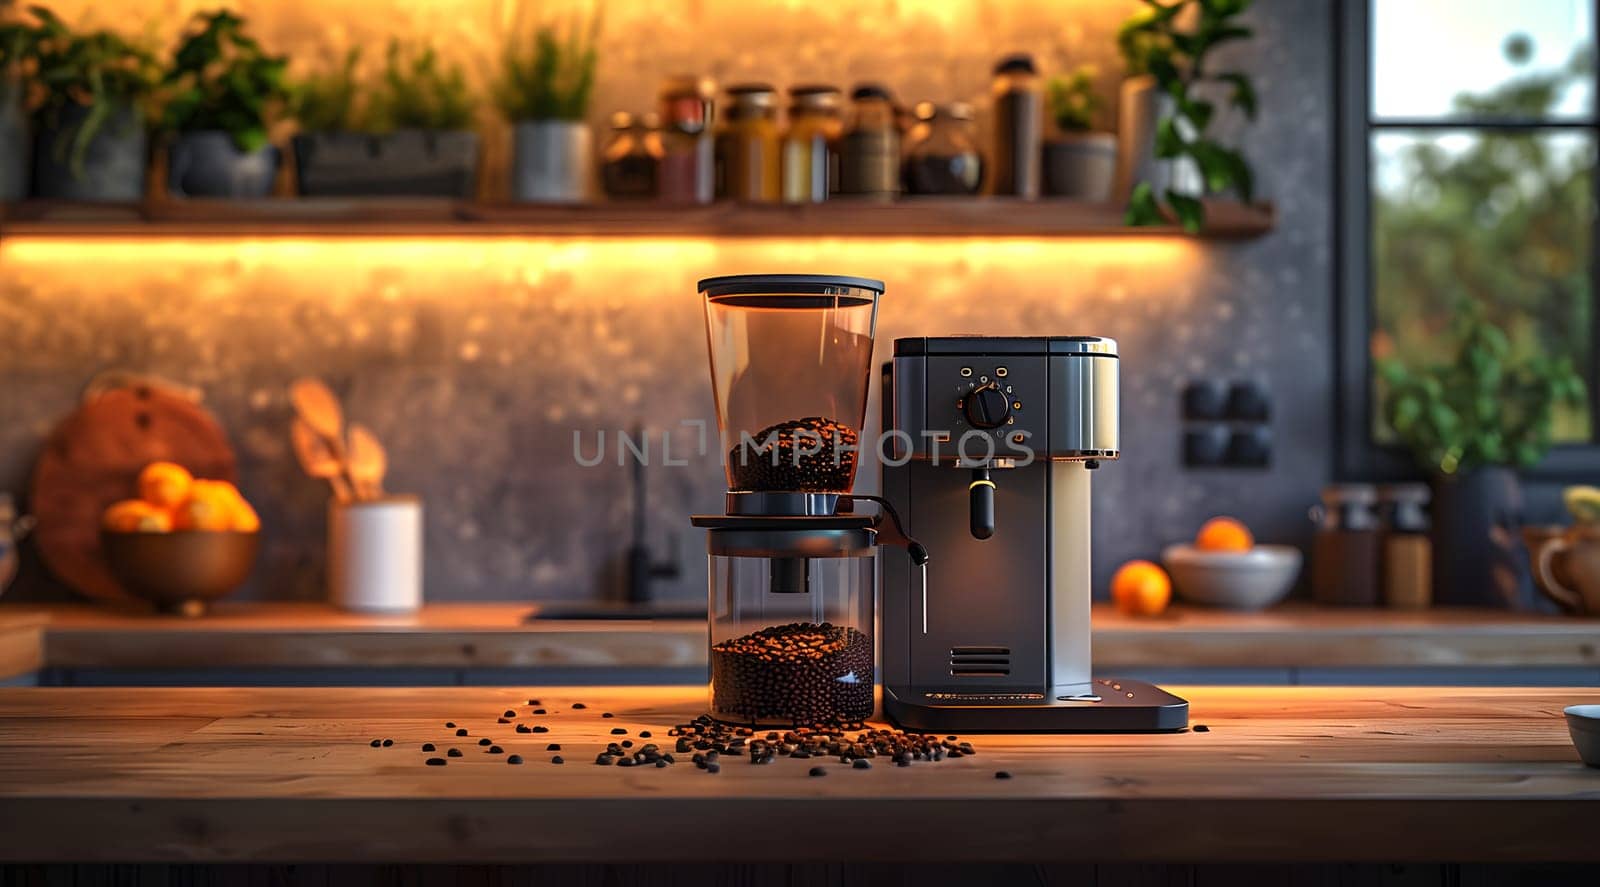 A coffee grinder is positioned on a kitchen counter next to a coffee maker, both illuminated by natural light streaming through the window